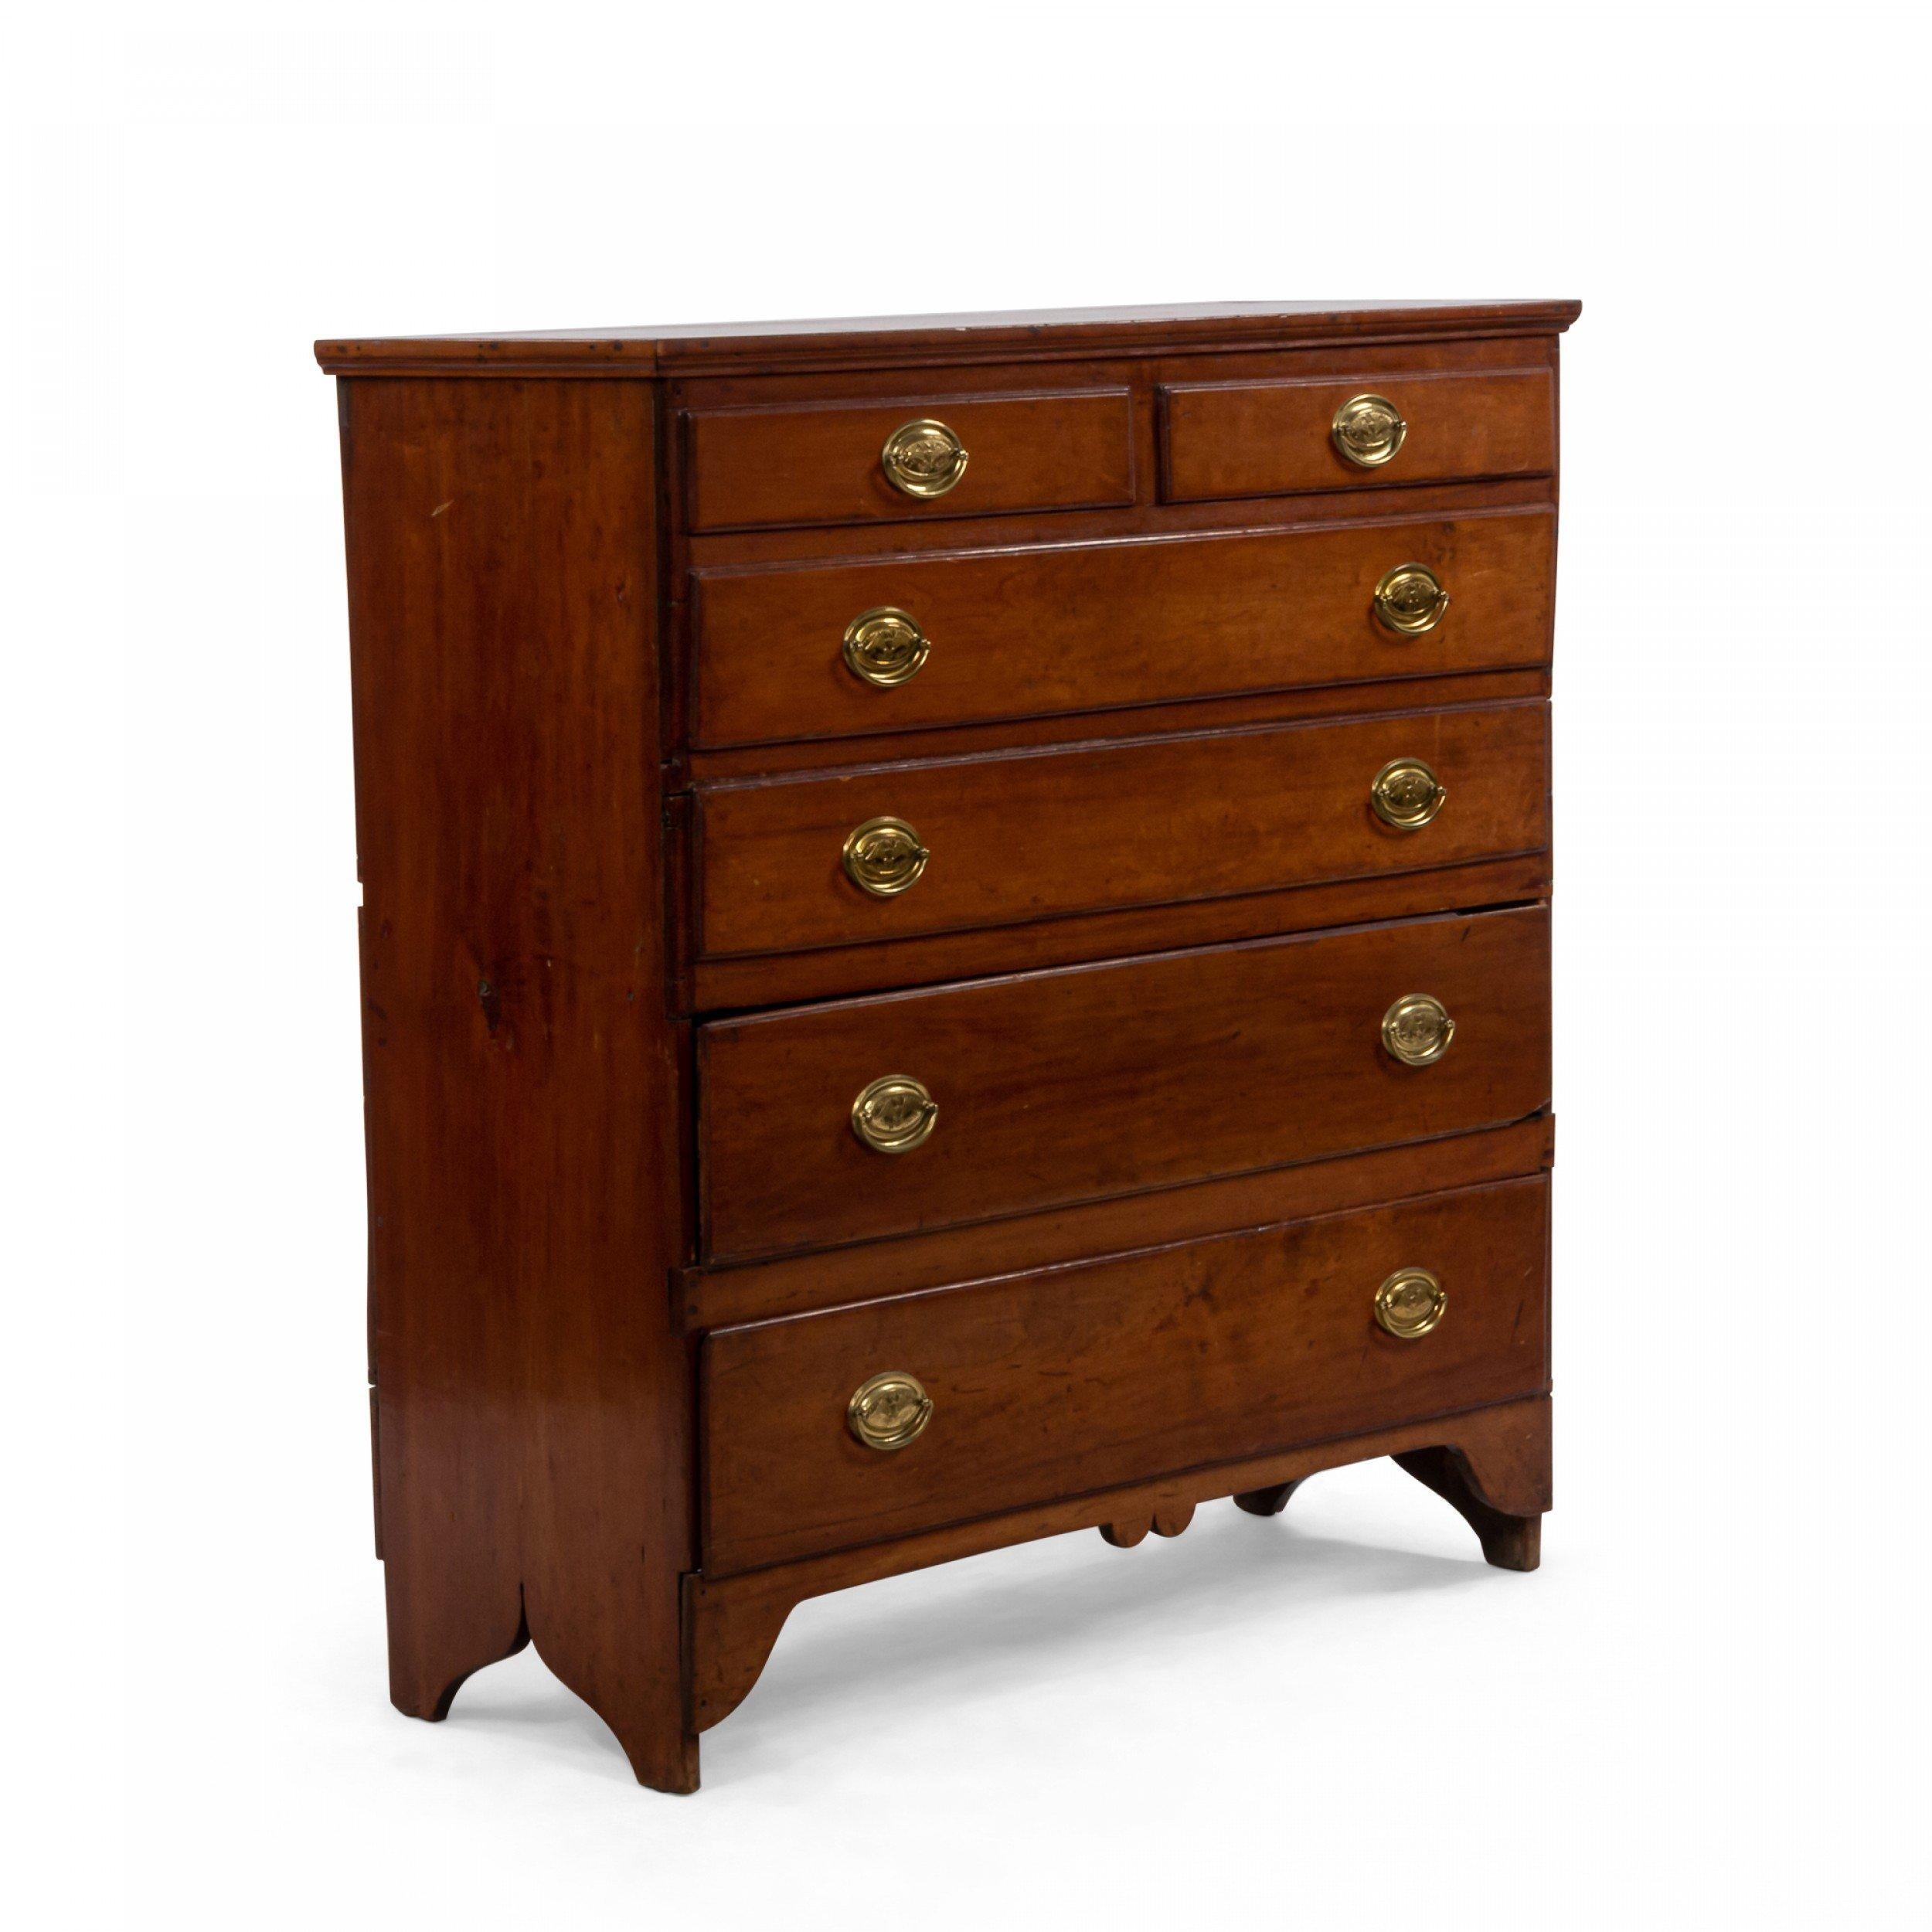 American Federal style 19th century mahogany chest of drawers with 2 lower drawers above dummy drawers having a lift top with replaced brass hardware with an eagle impression supported on bracket feet.